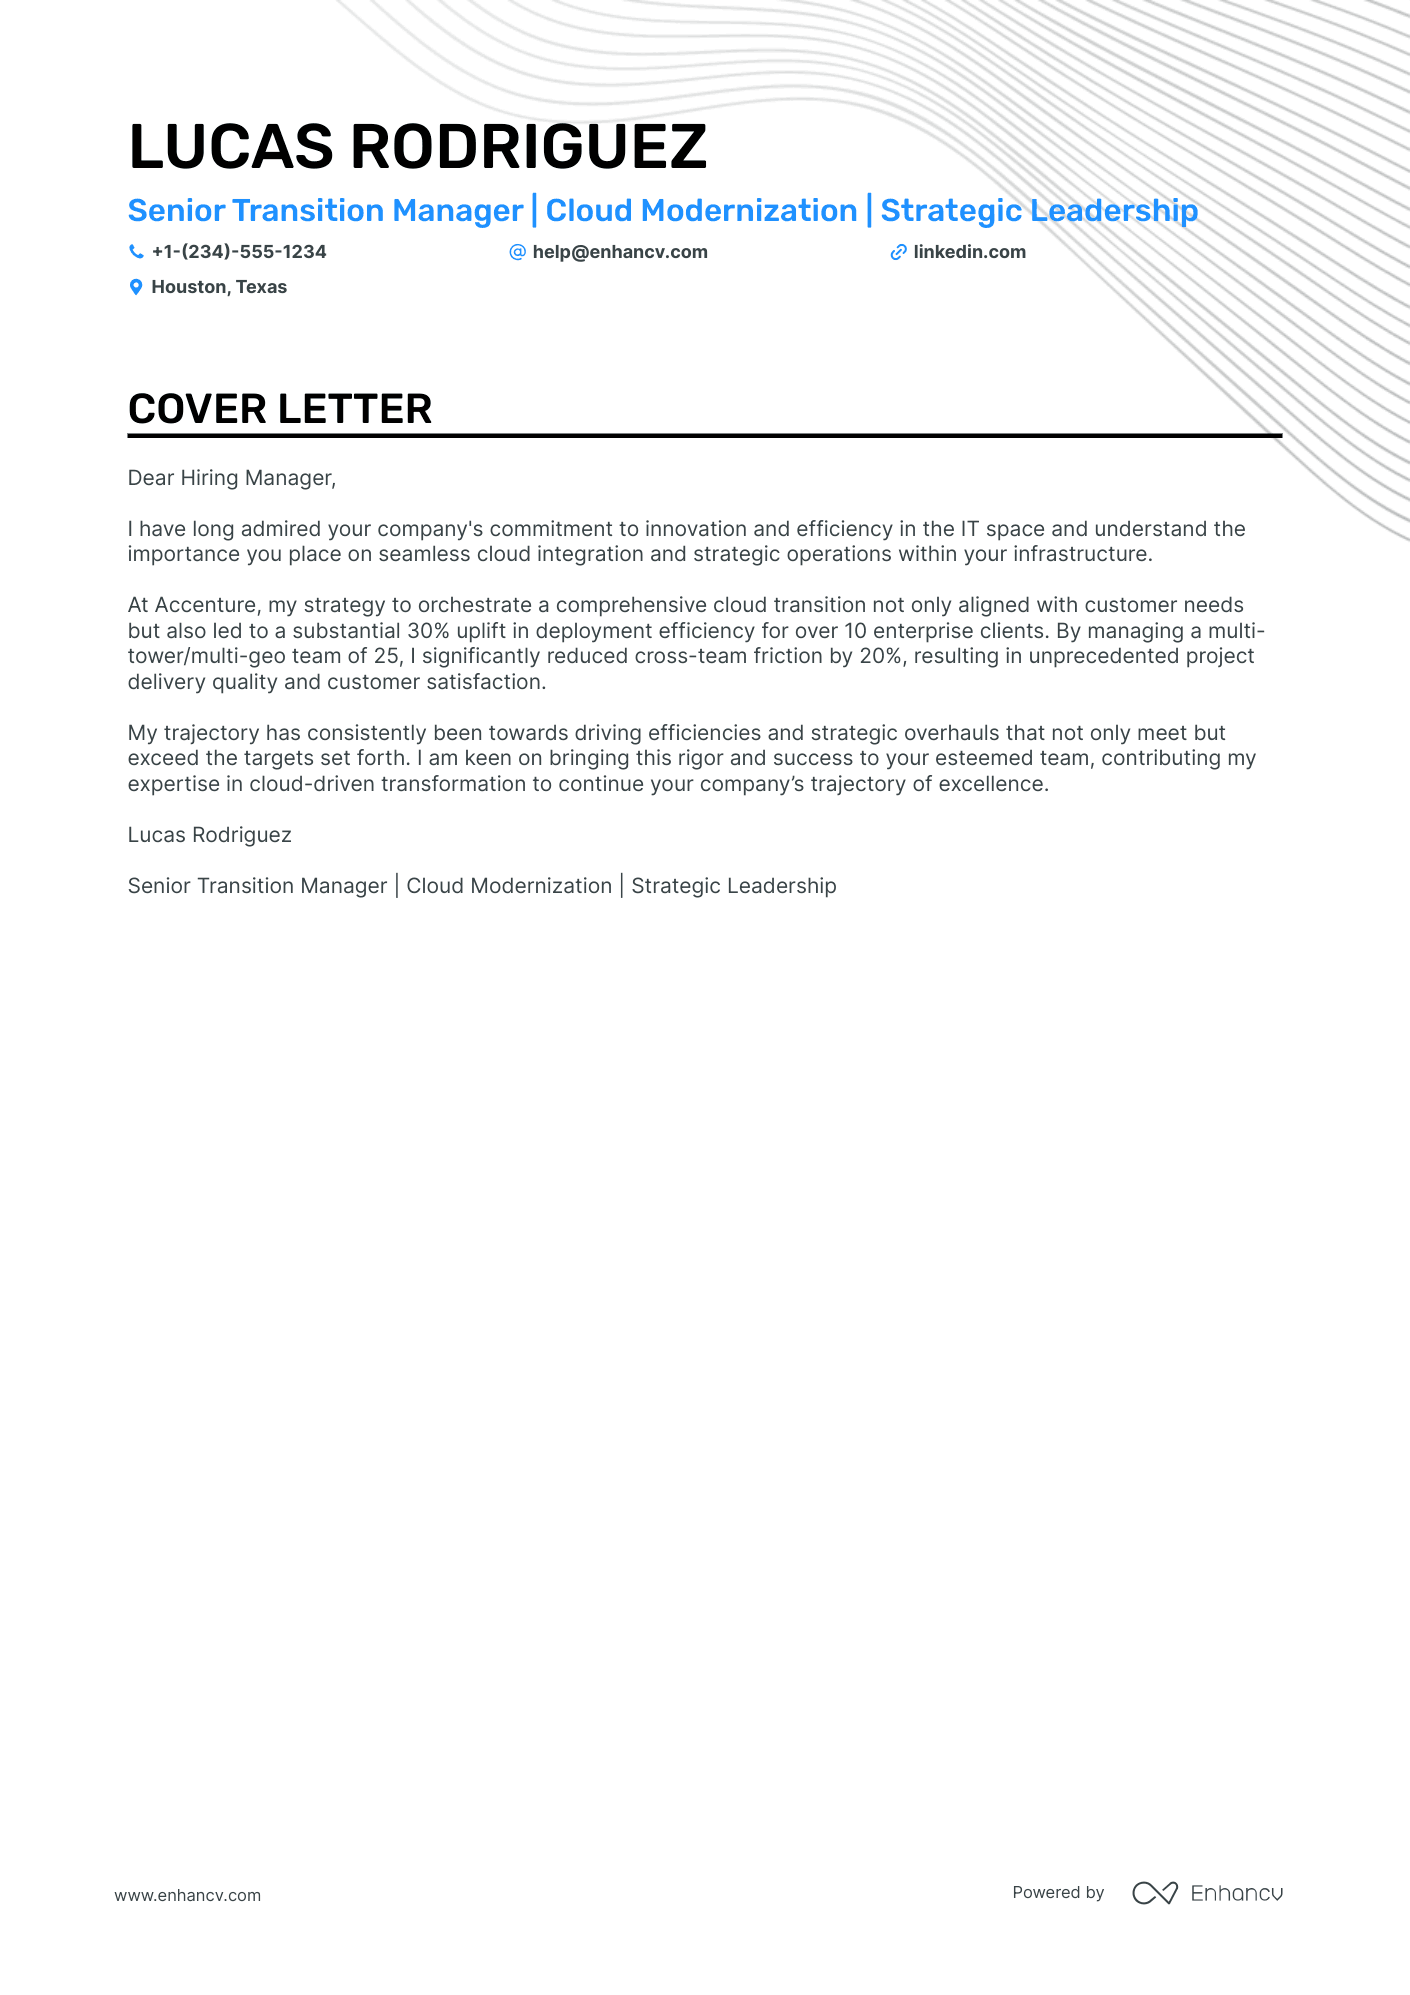 Transition Manager cover letter